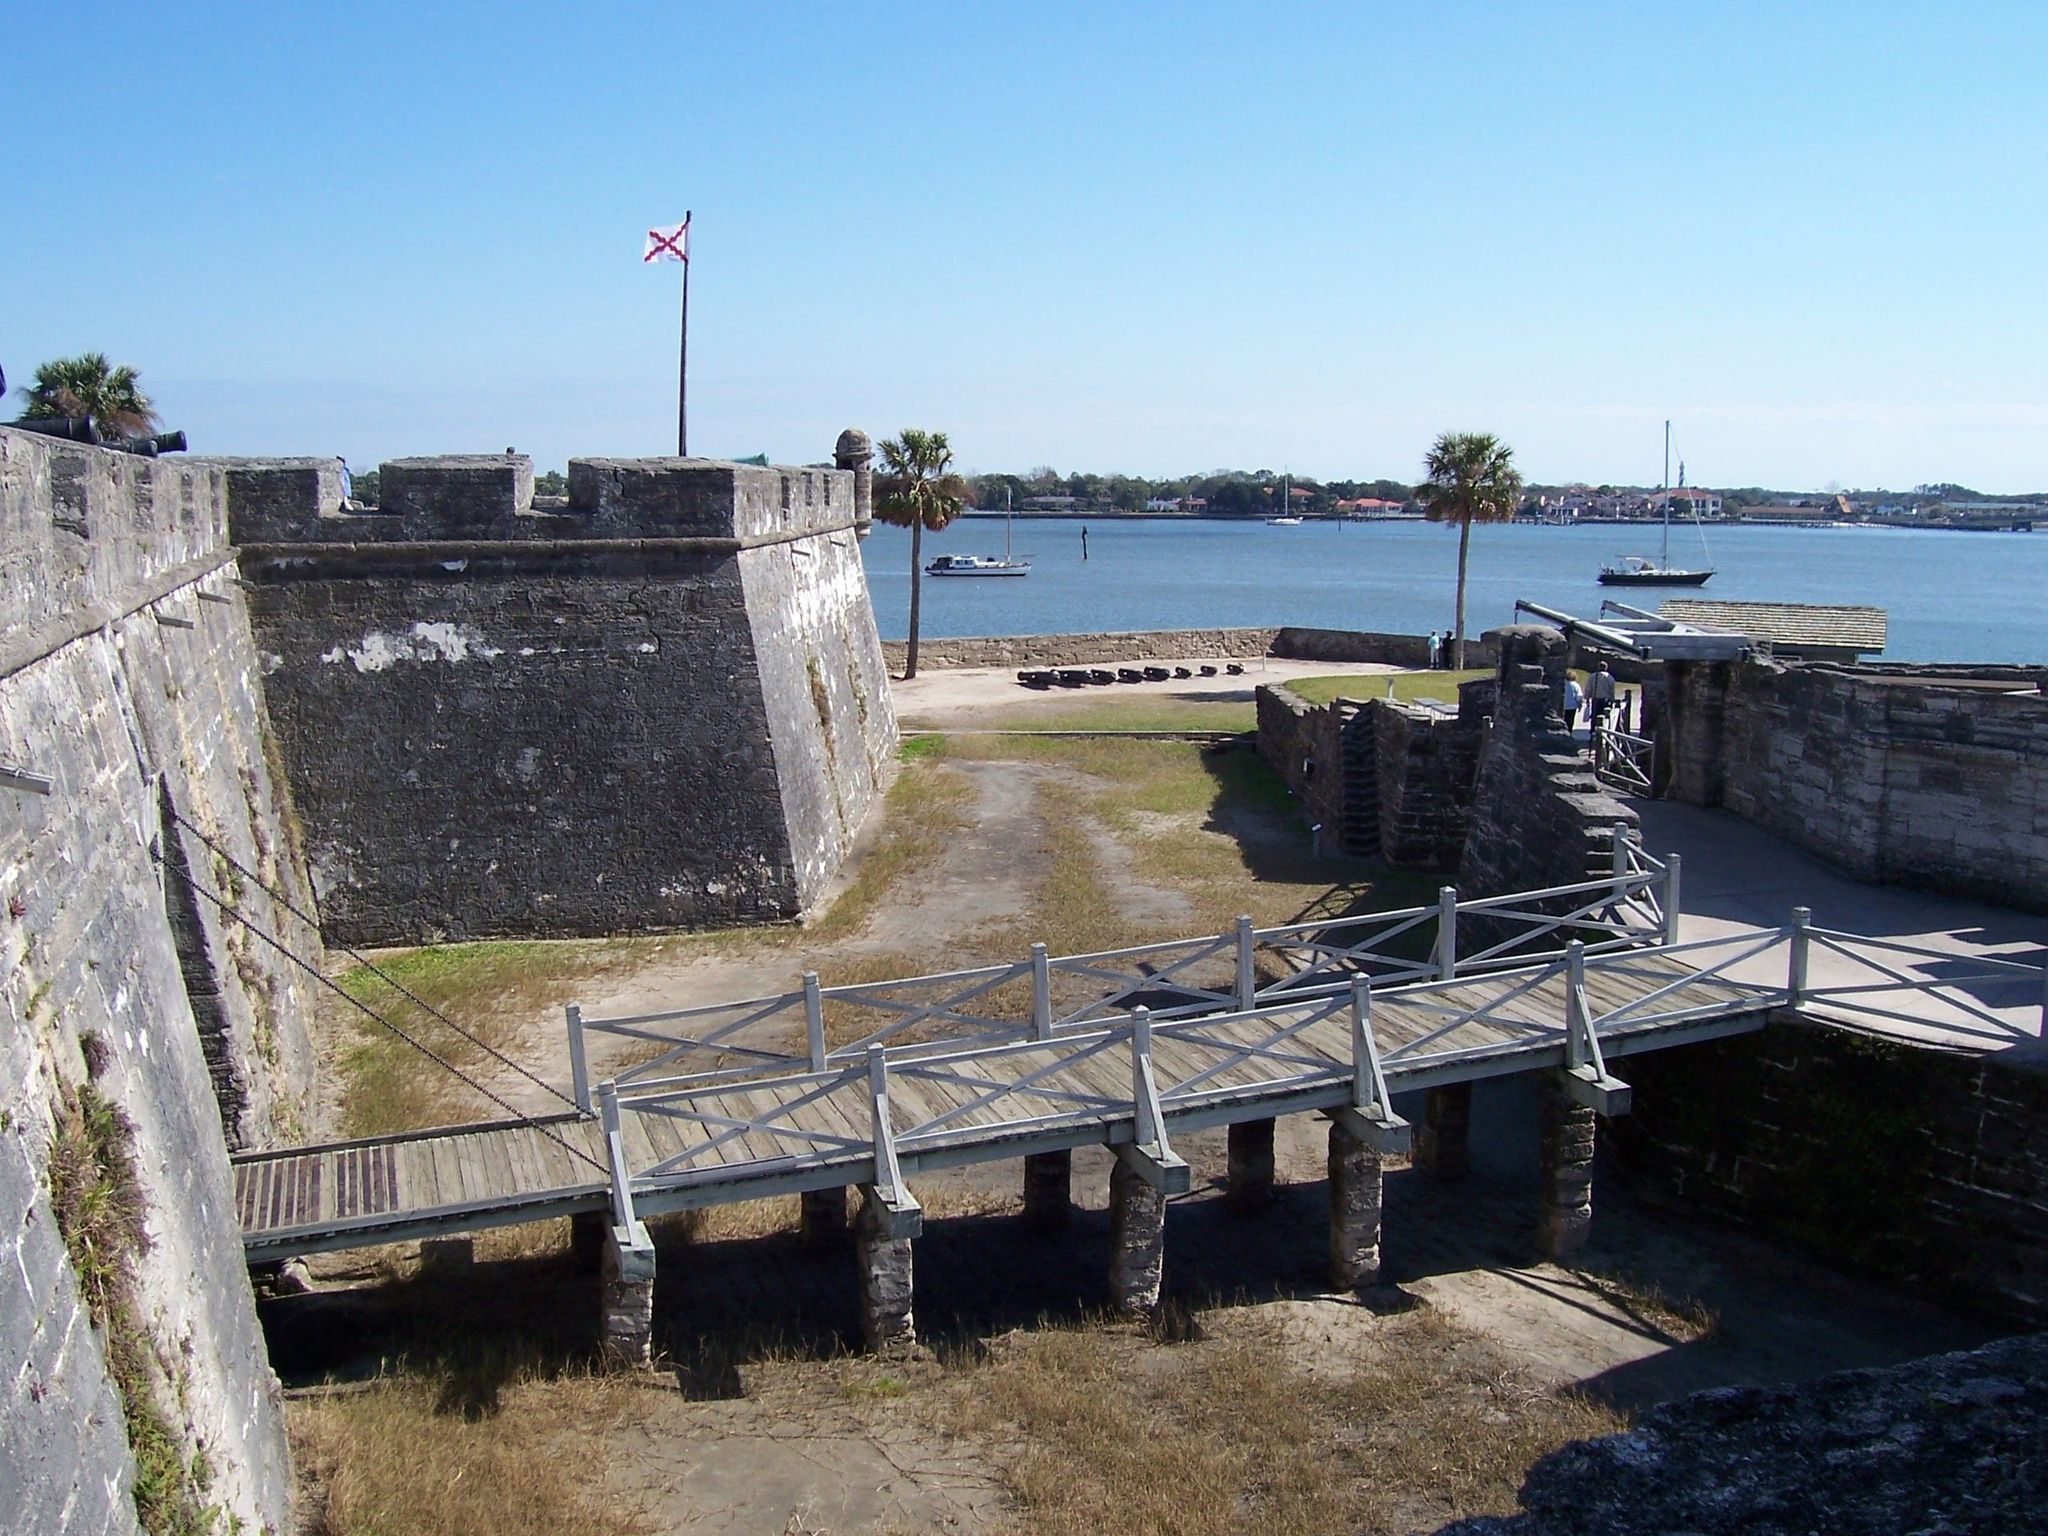 Crossing a dry moat, this drawbridge was the only way into the Castillo.